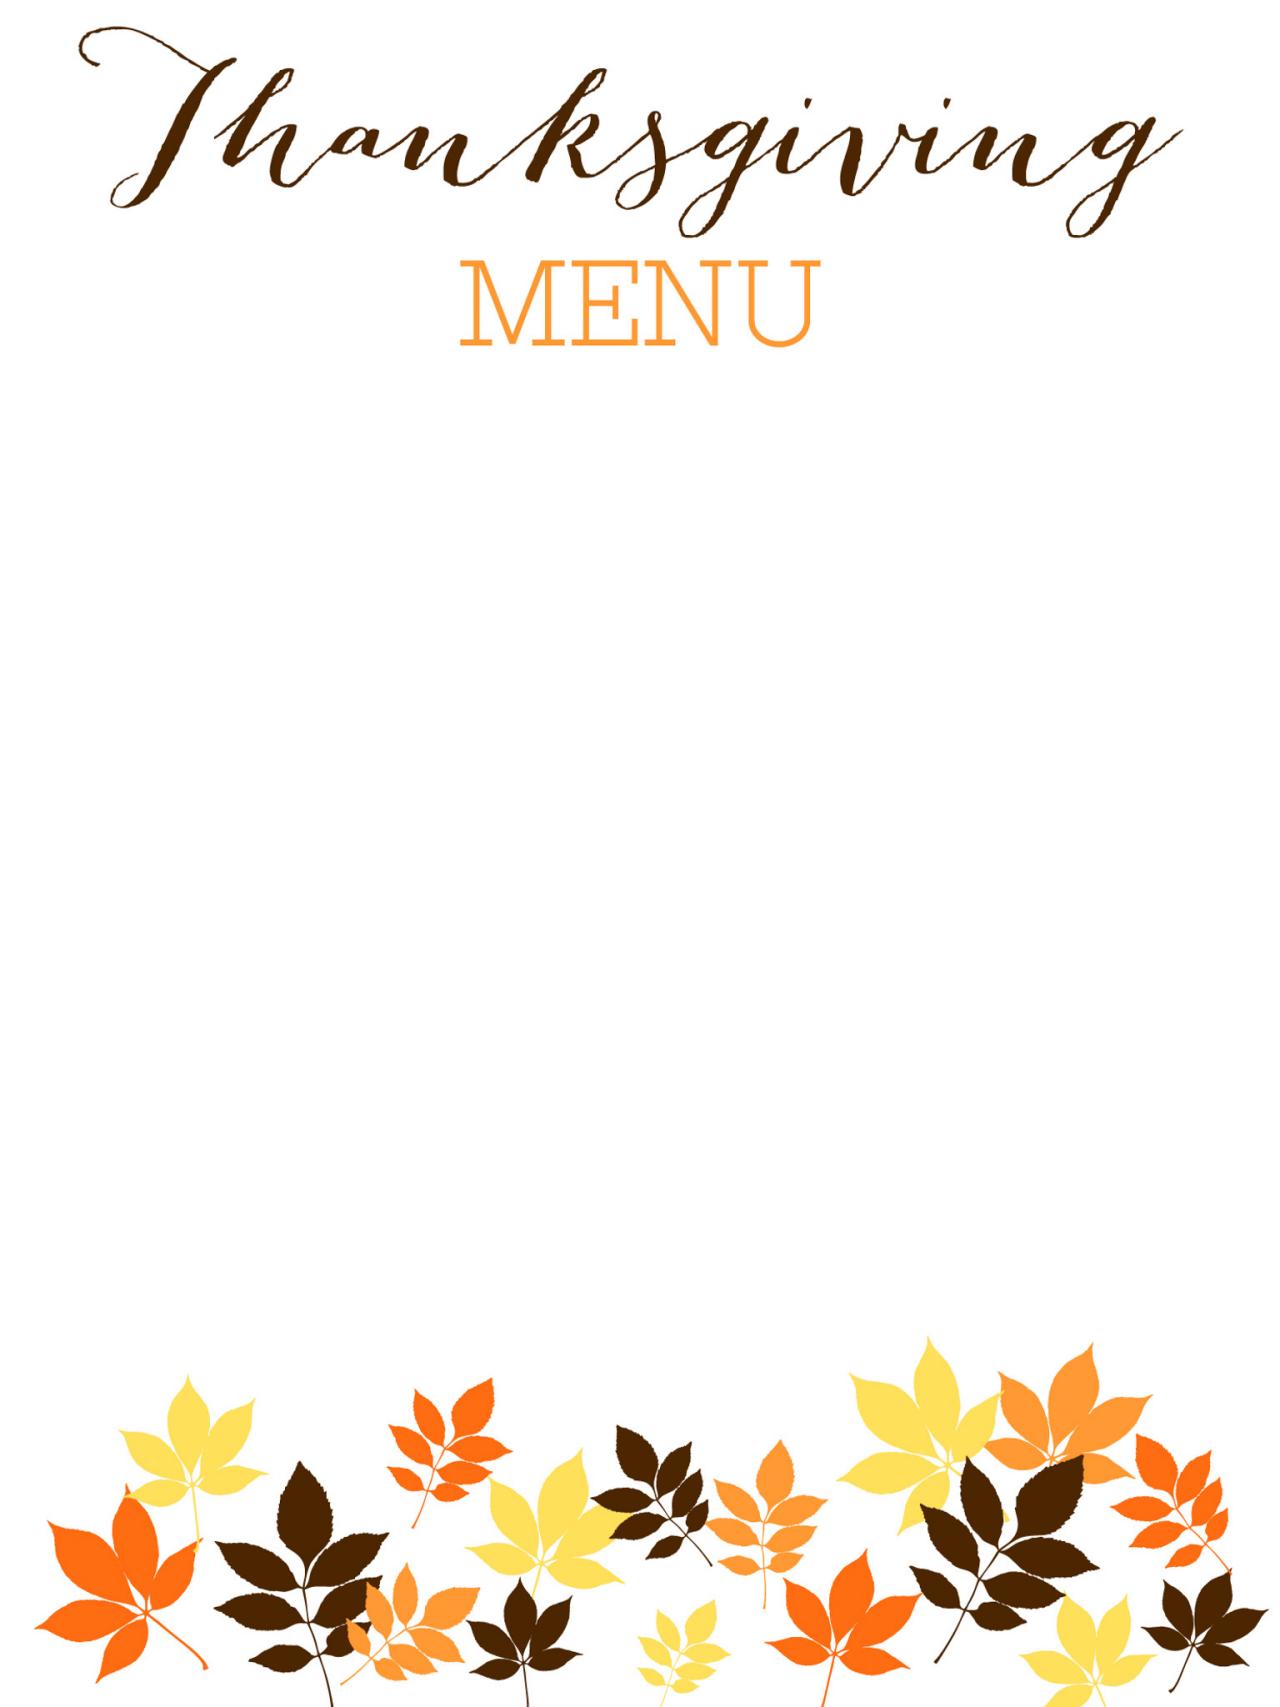 free-thanksgiving-templates-49-place-cards-banners-crafts-decor-more-hgtv